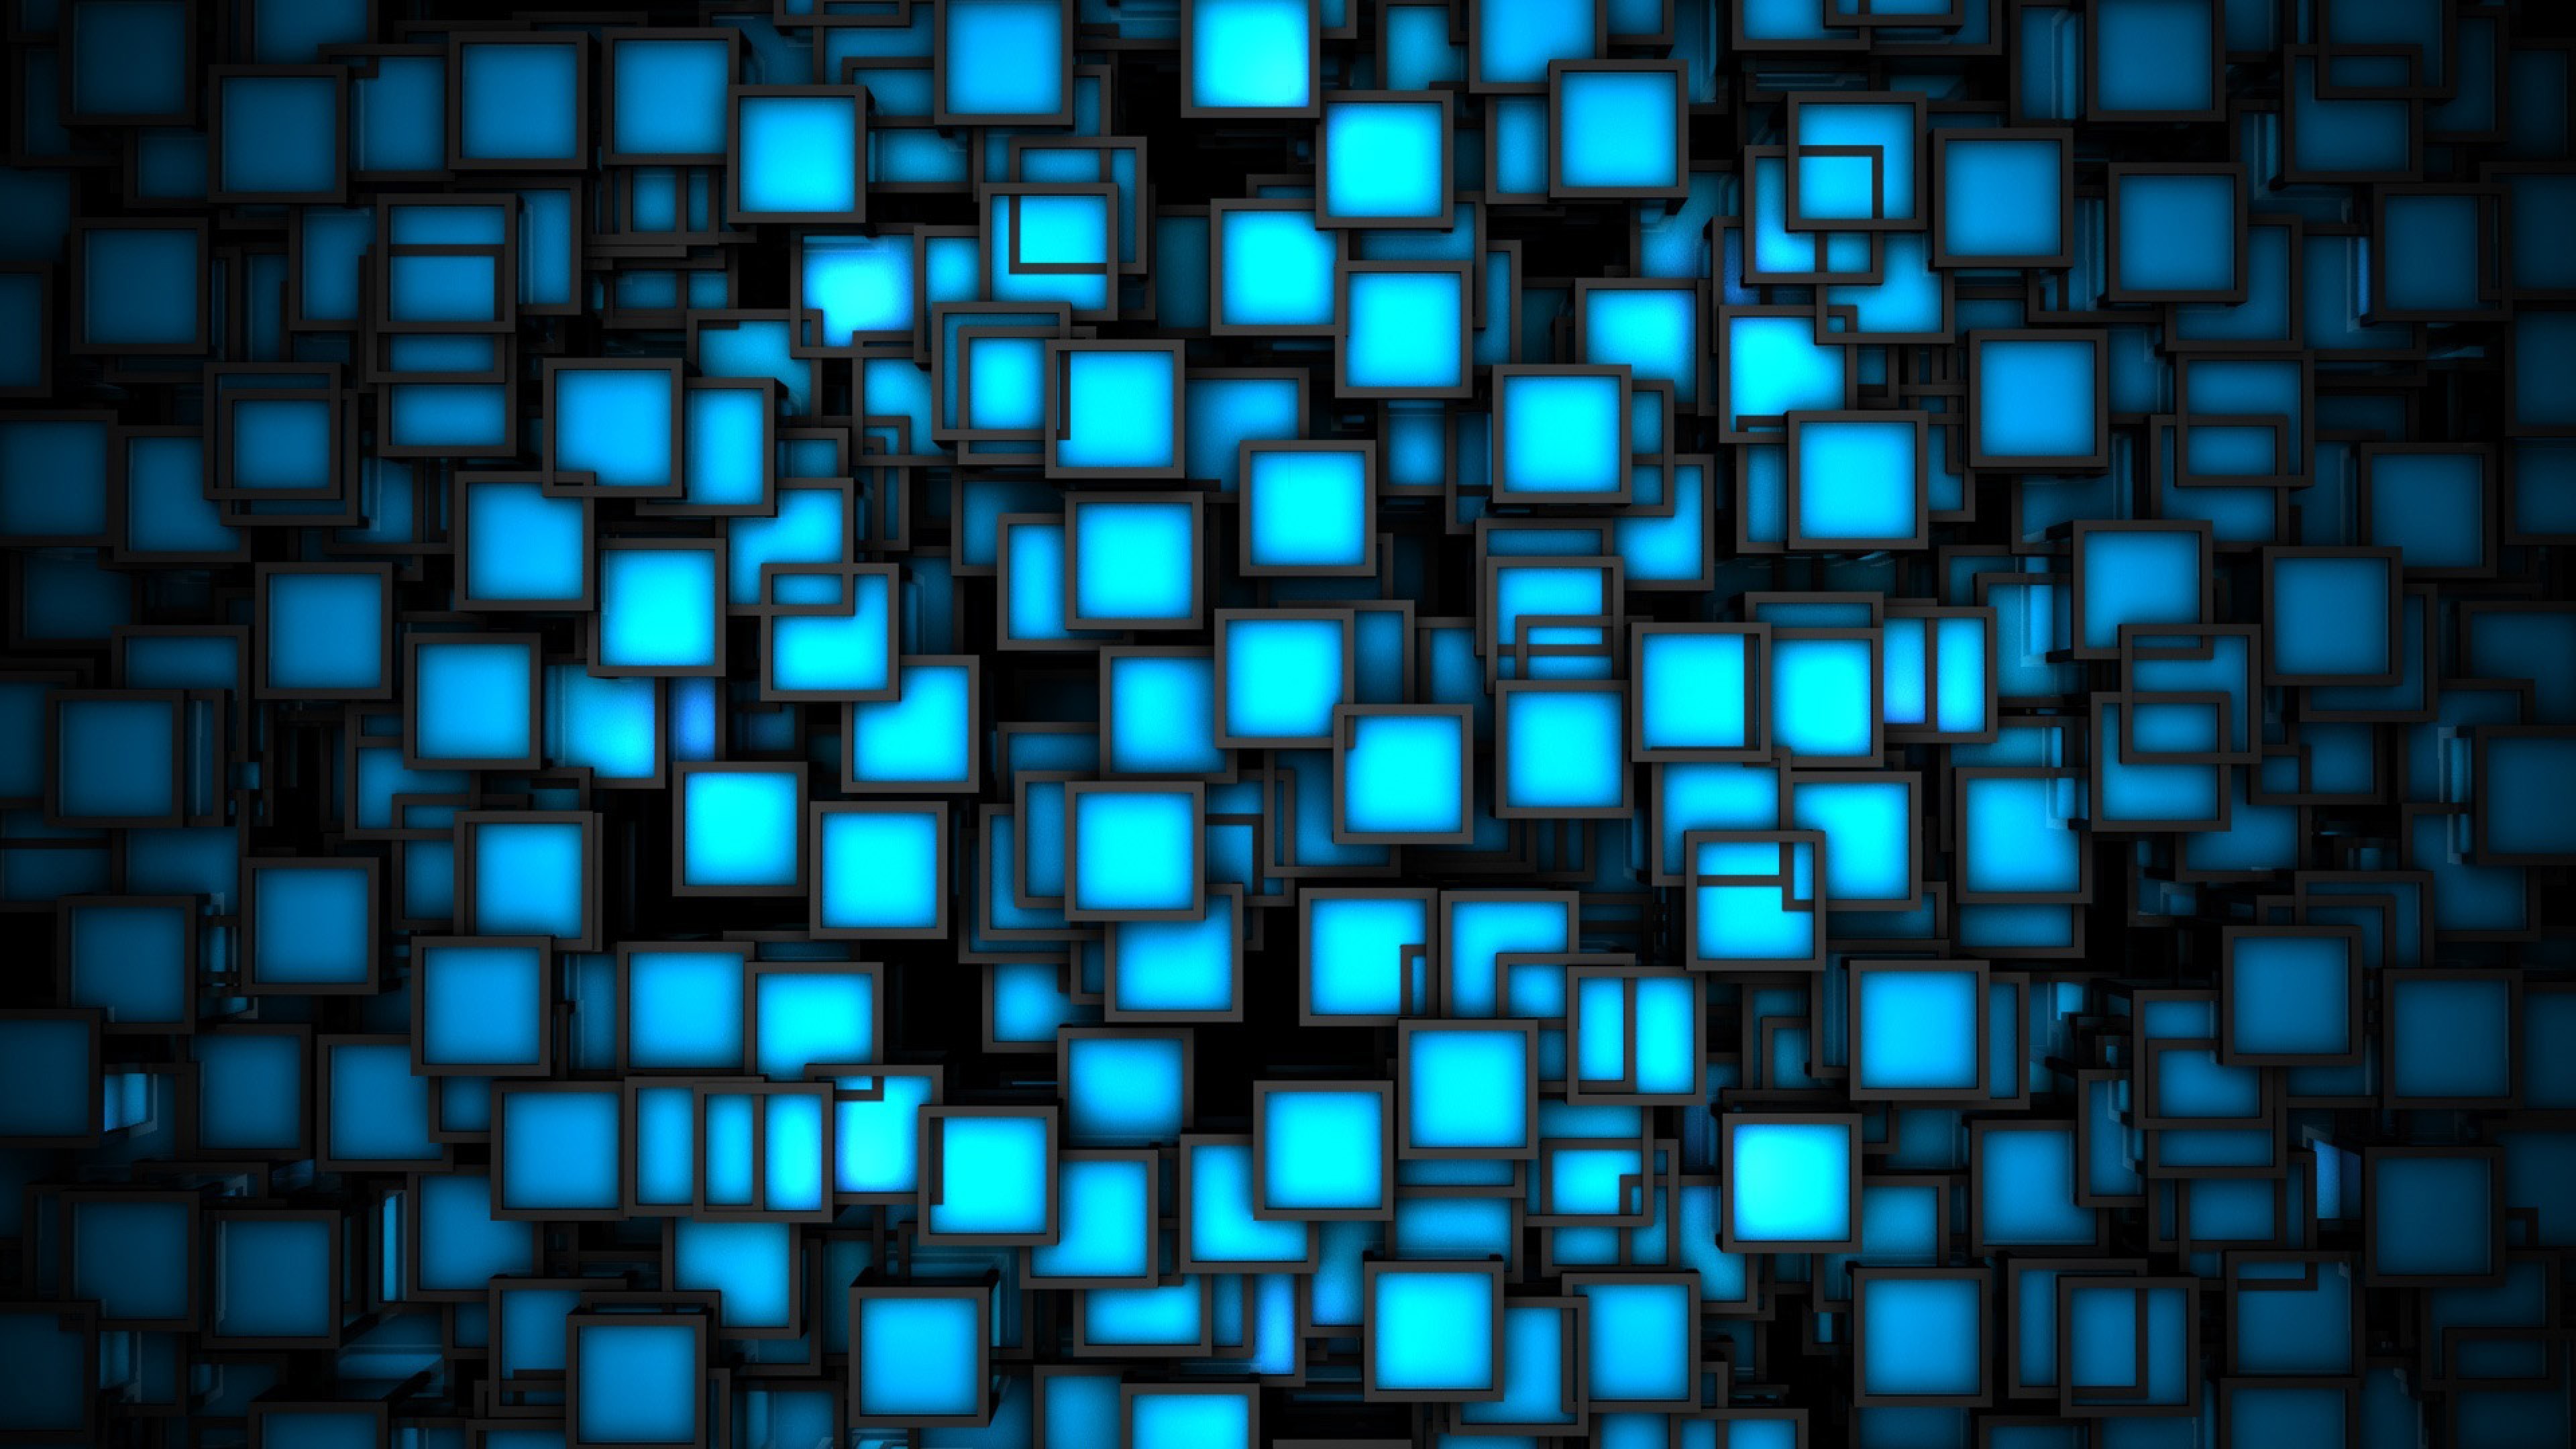 4K Square Wallpapers